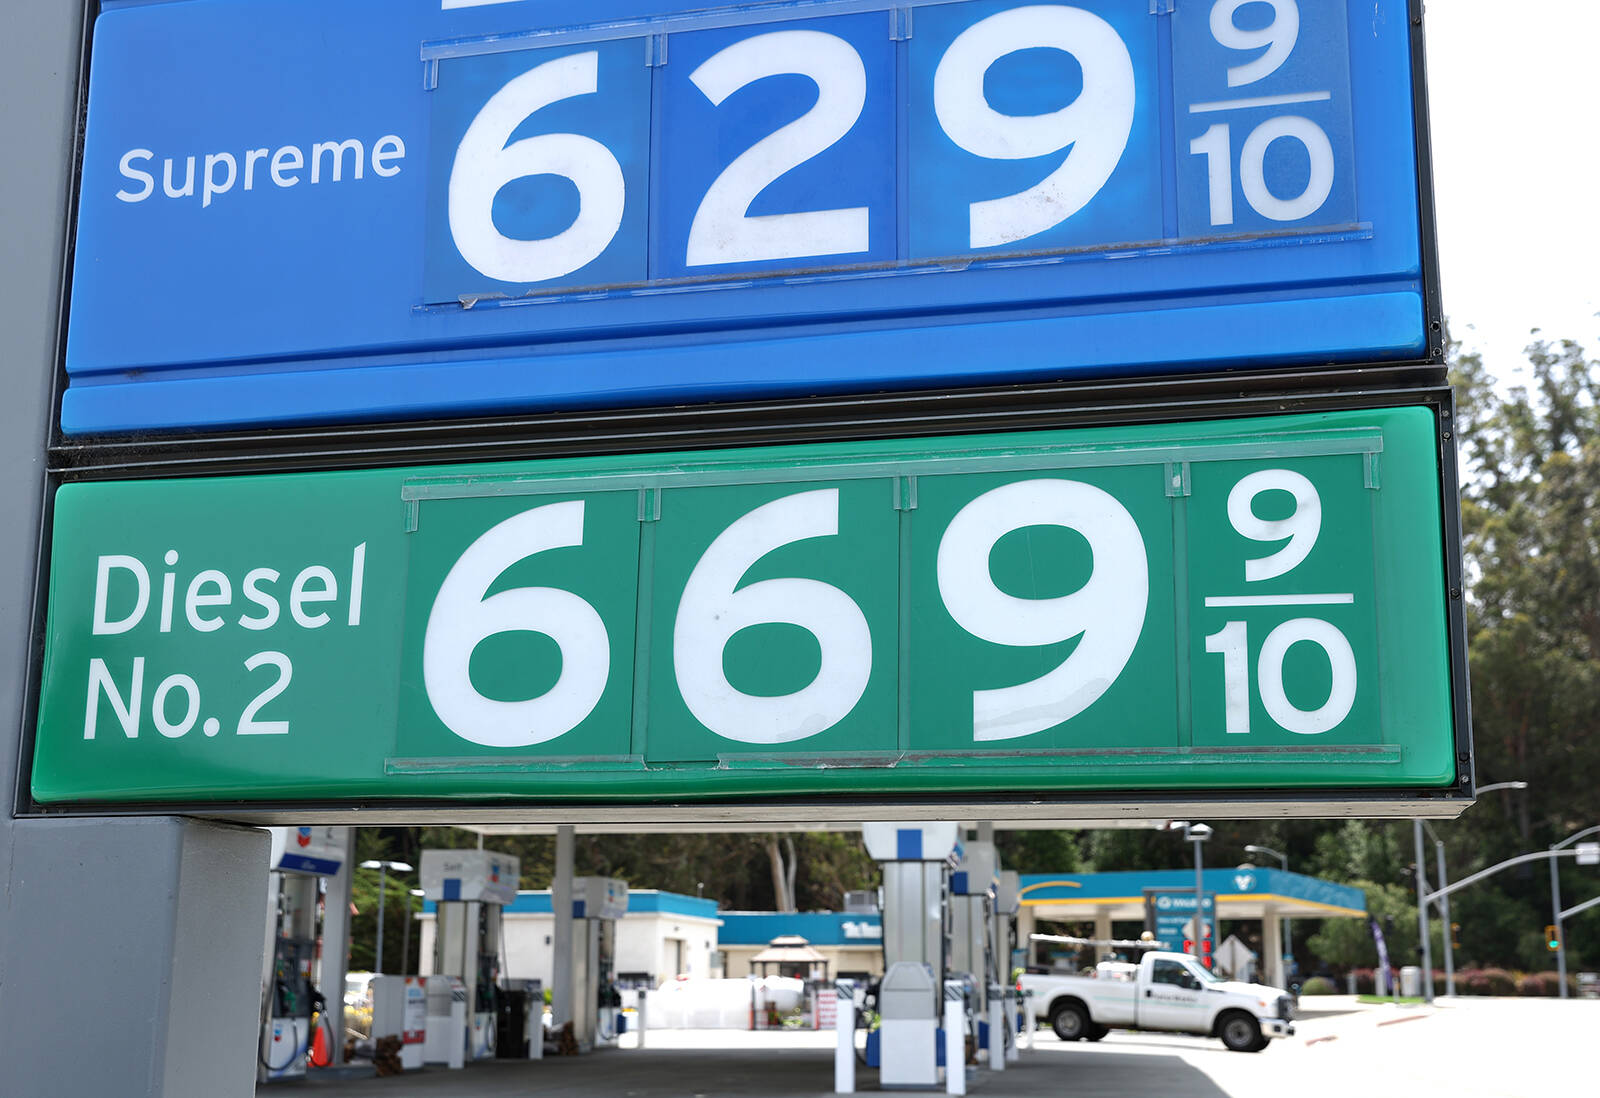 Diesel prices over $6.50 a gallon are displayed at a Chevron gas station on May 2, 2022, in Mill Valley, Calif. Justin Sullivan | Getty Images | TNS